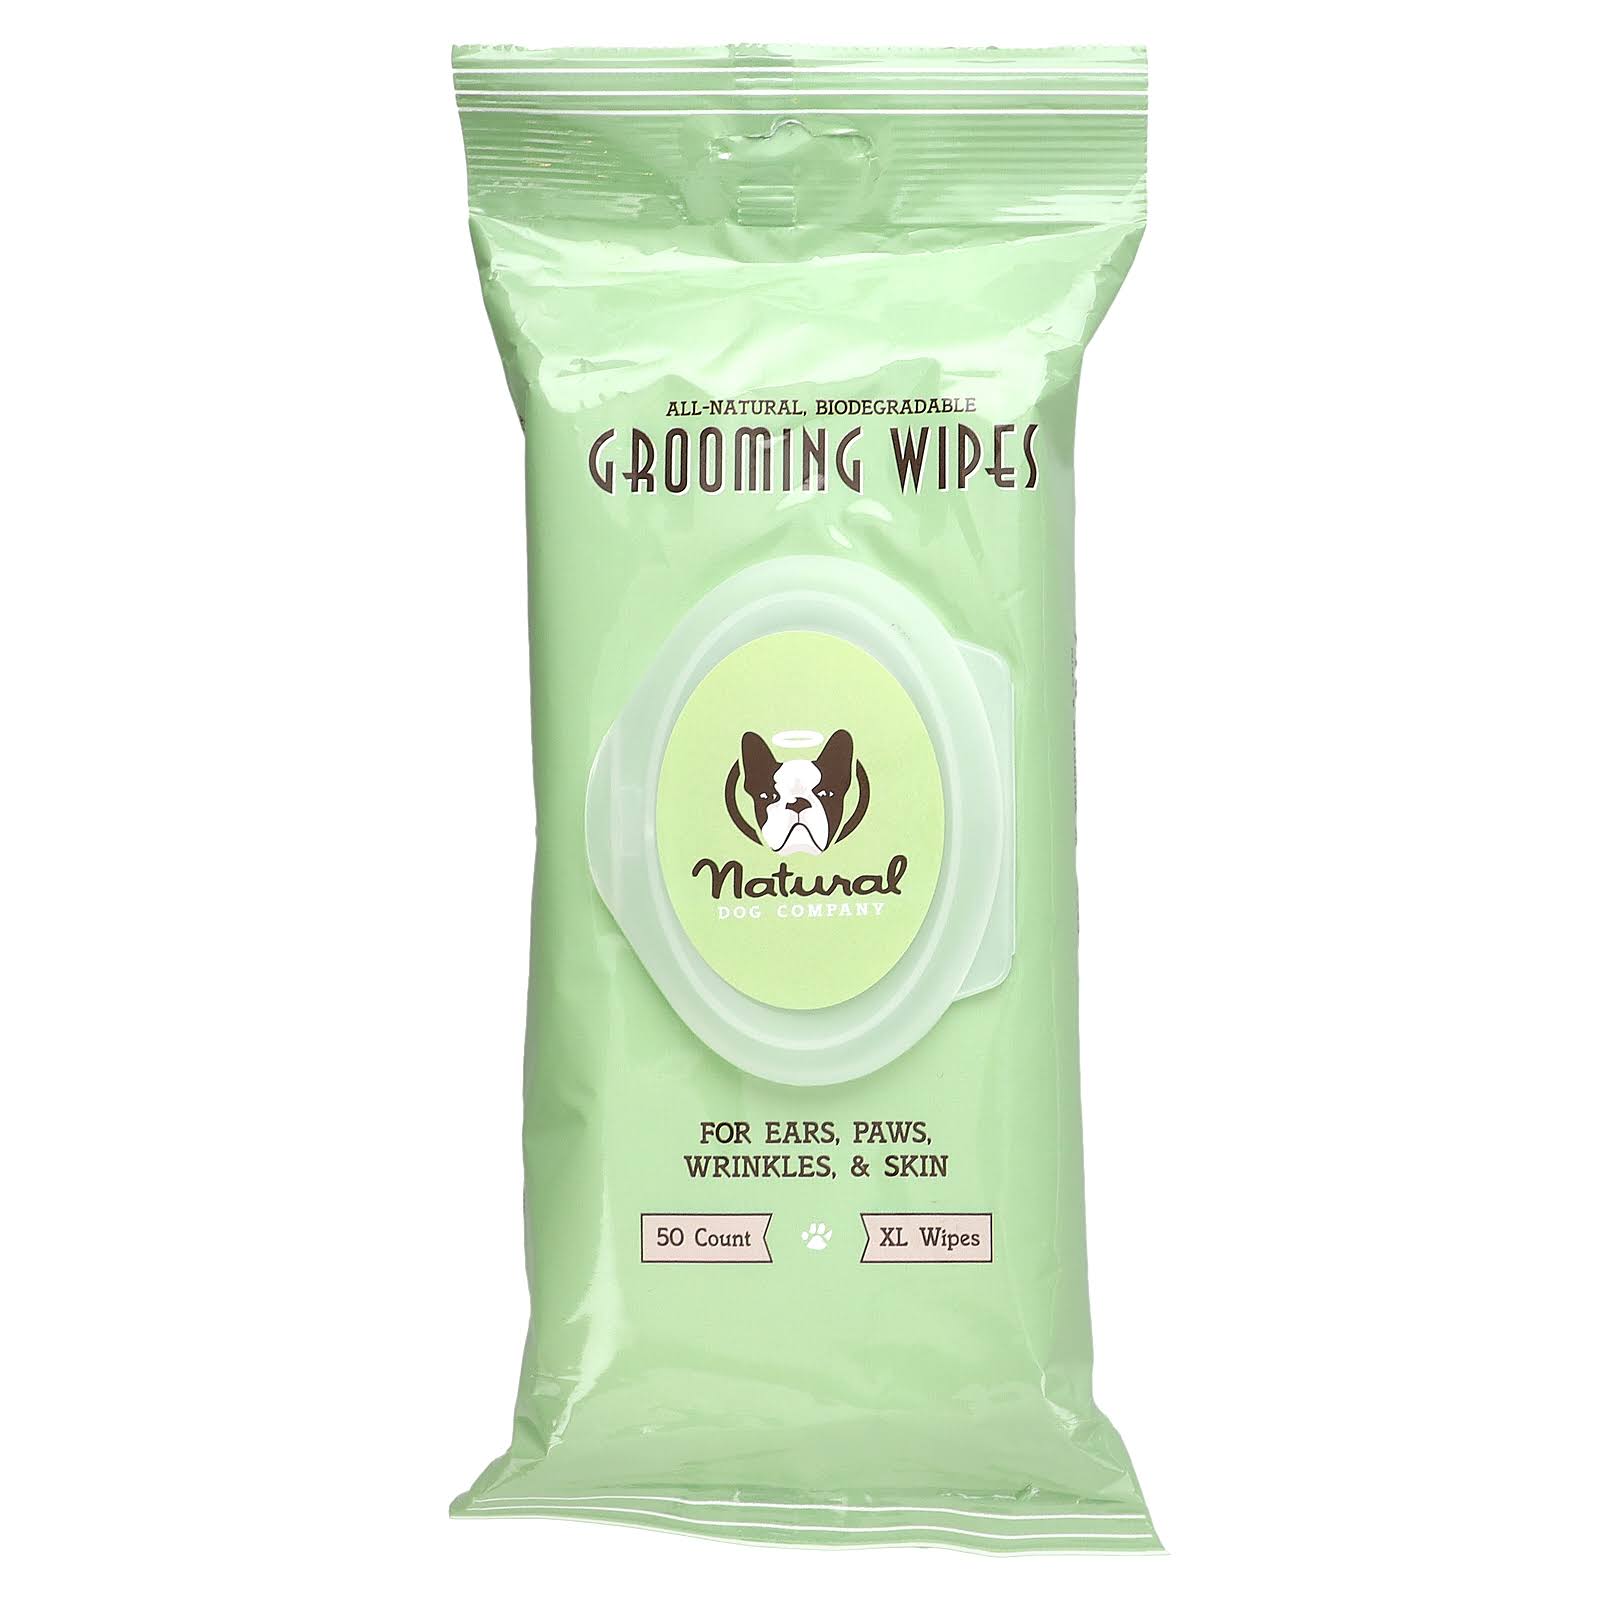 Natural Dog Company Grooming Wipes - 50 Count